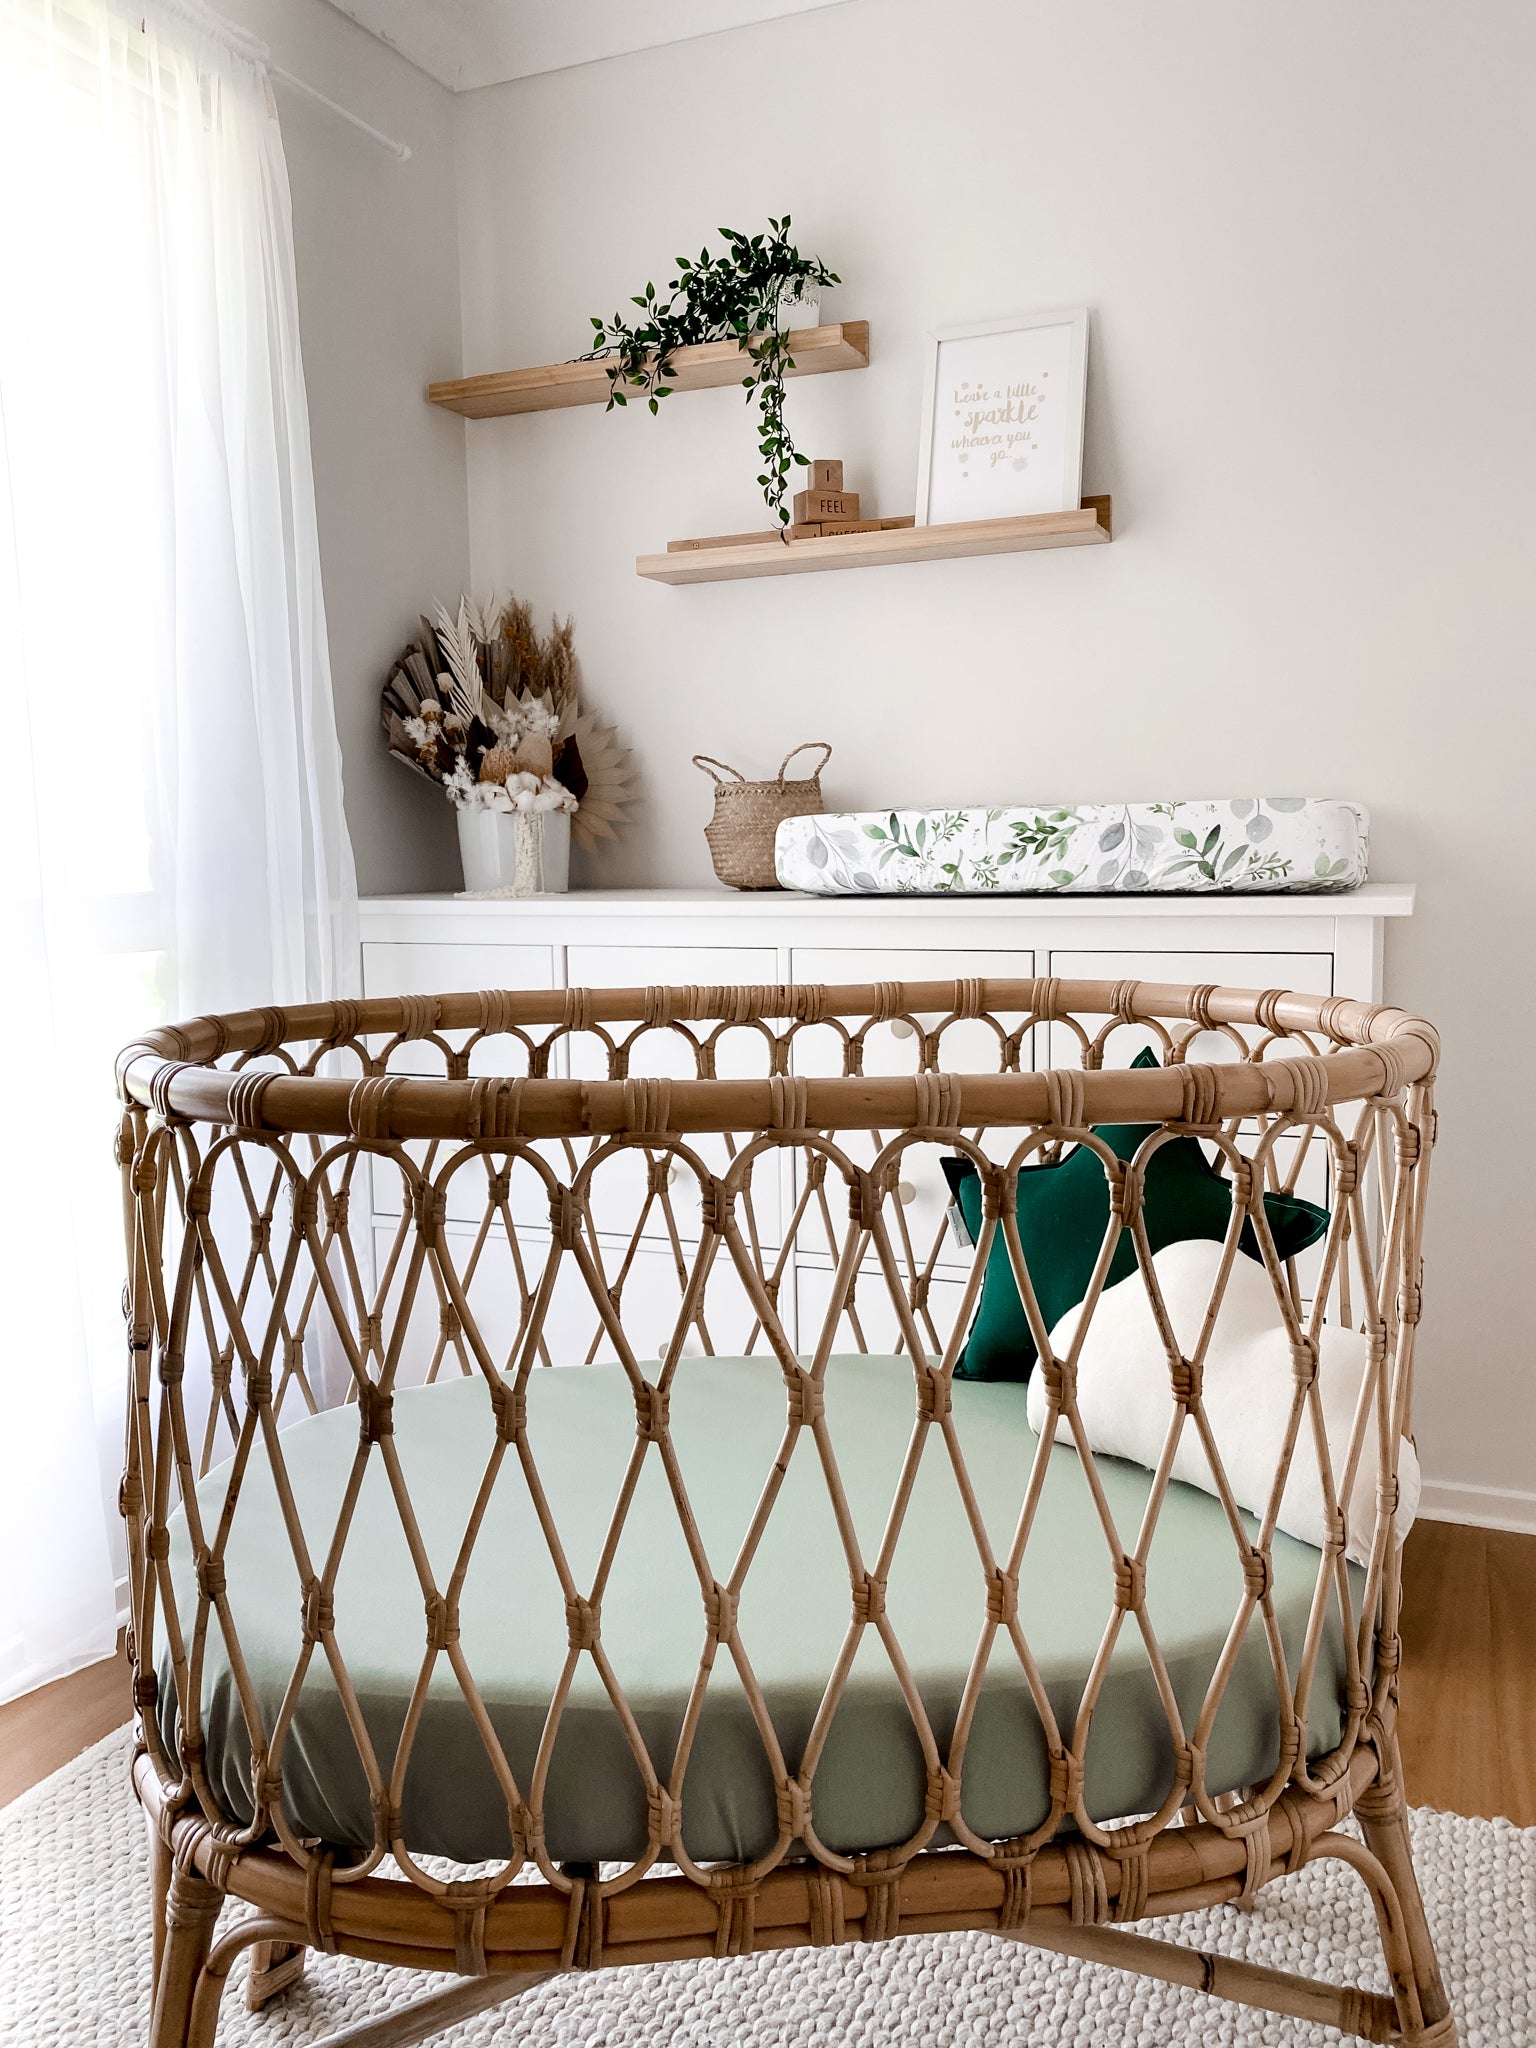 Sage Bassinet sheet with a focus on safe sleep for your baby